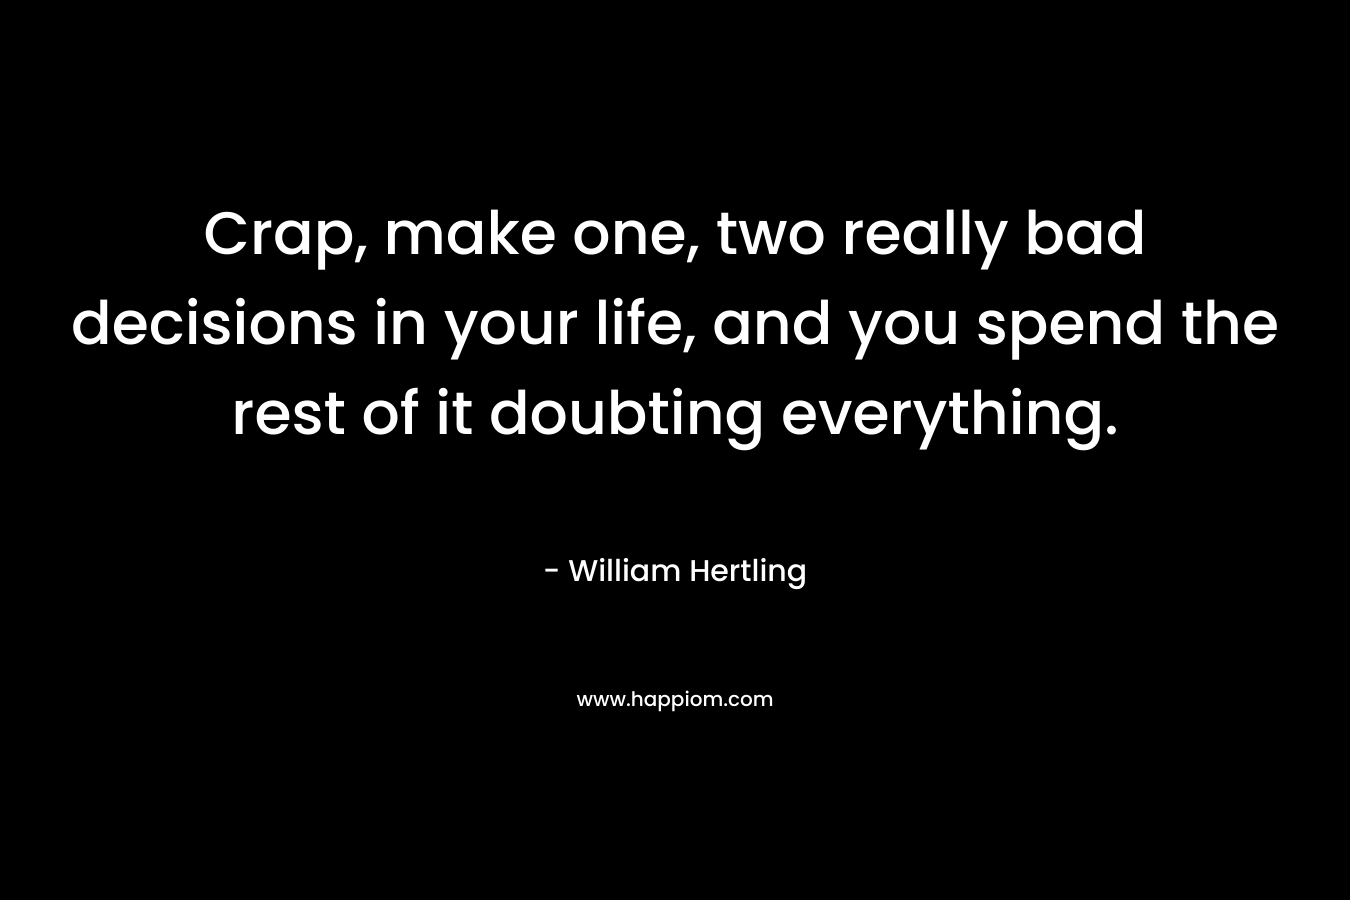 Crap, make one, two really bad decisions in your life, and you spend the rest of it doubting everything.